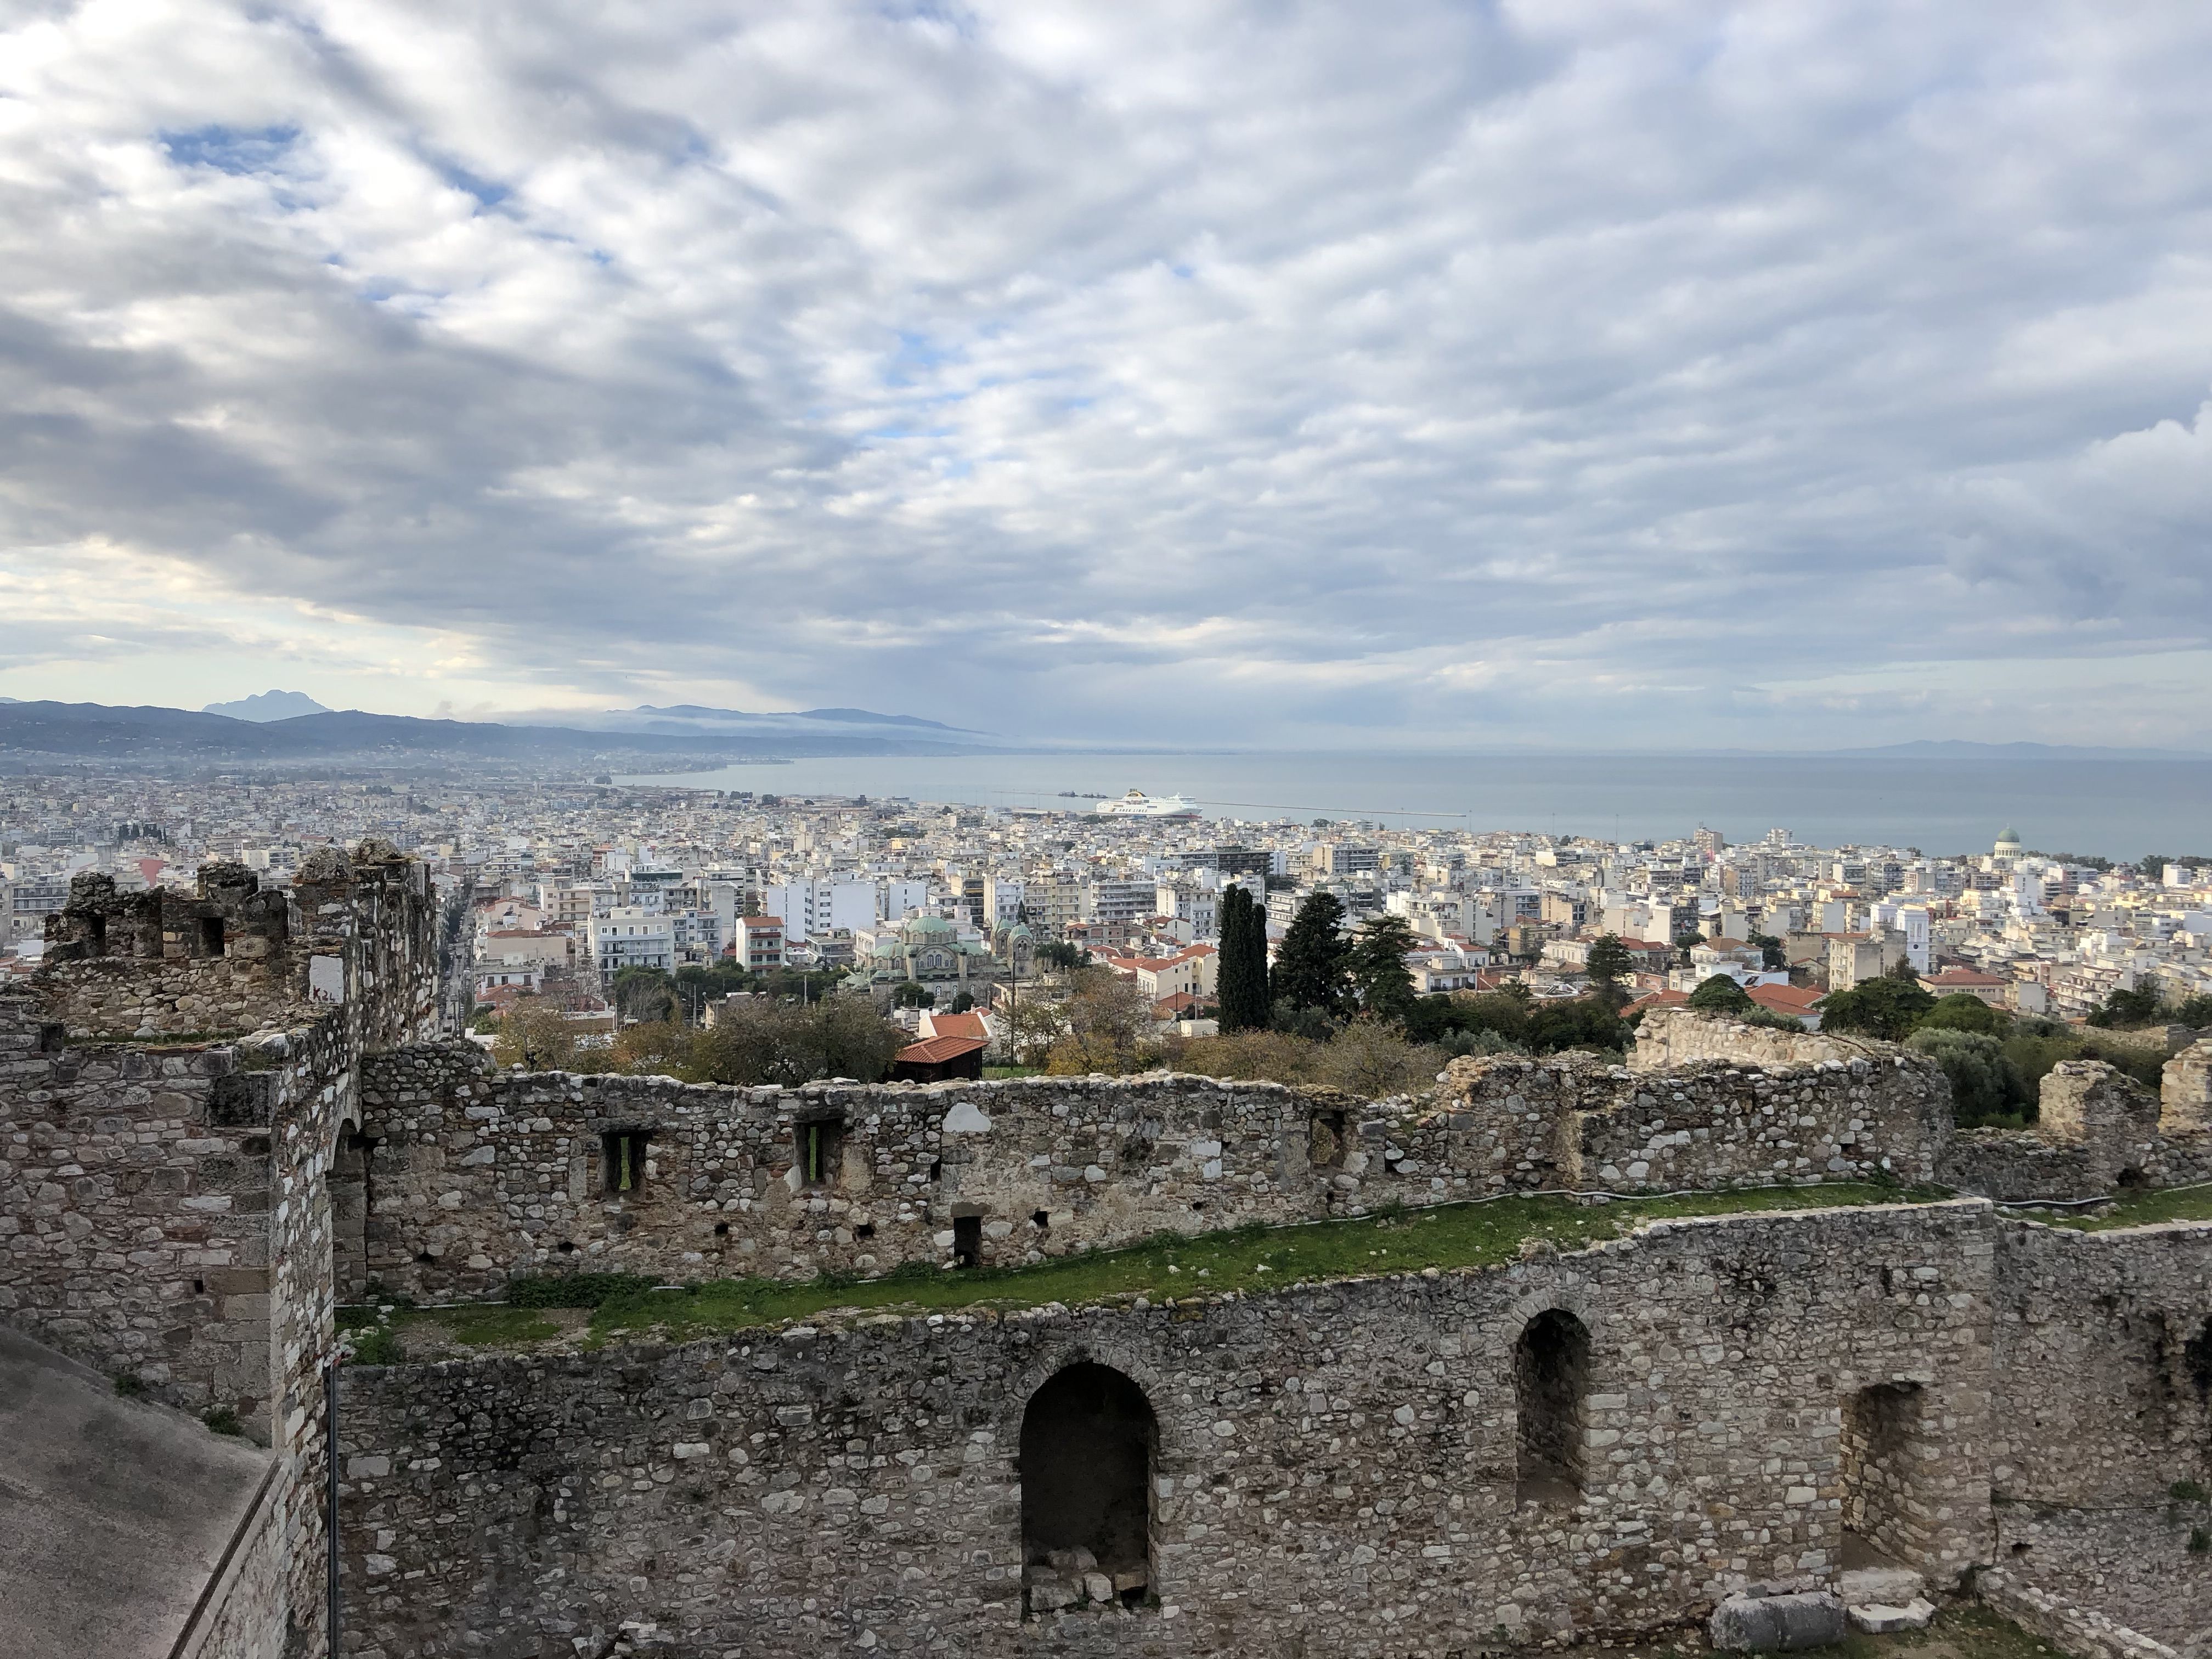 A view of Patras, across the walls and below the hill. It stretches much further into the distance than you might expect. On the right is the curve of the bay and the low clouds meet the mountains far in the distance.